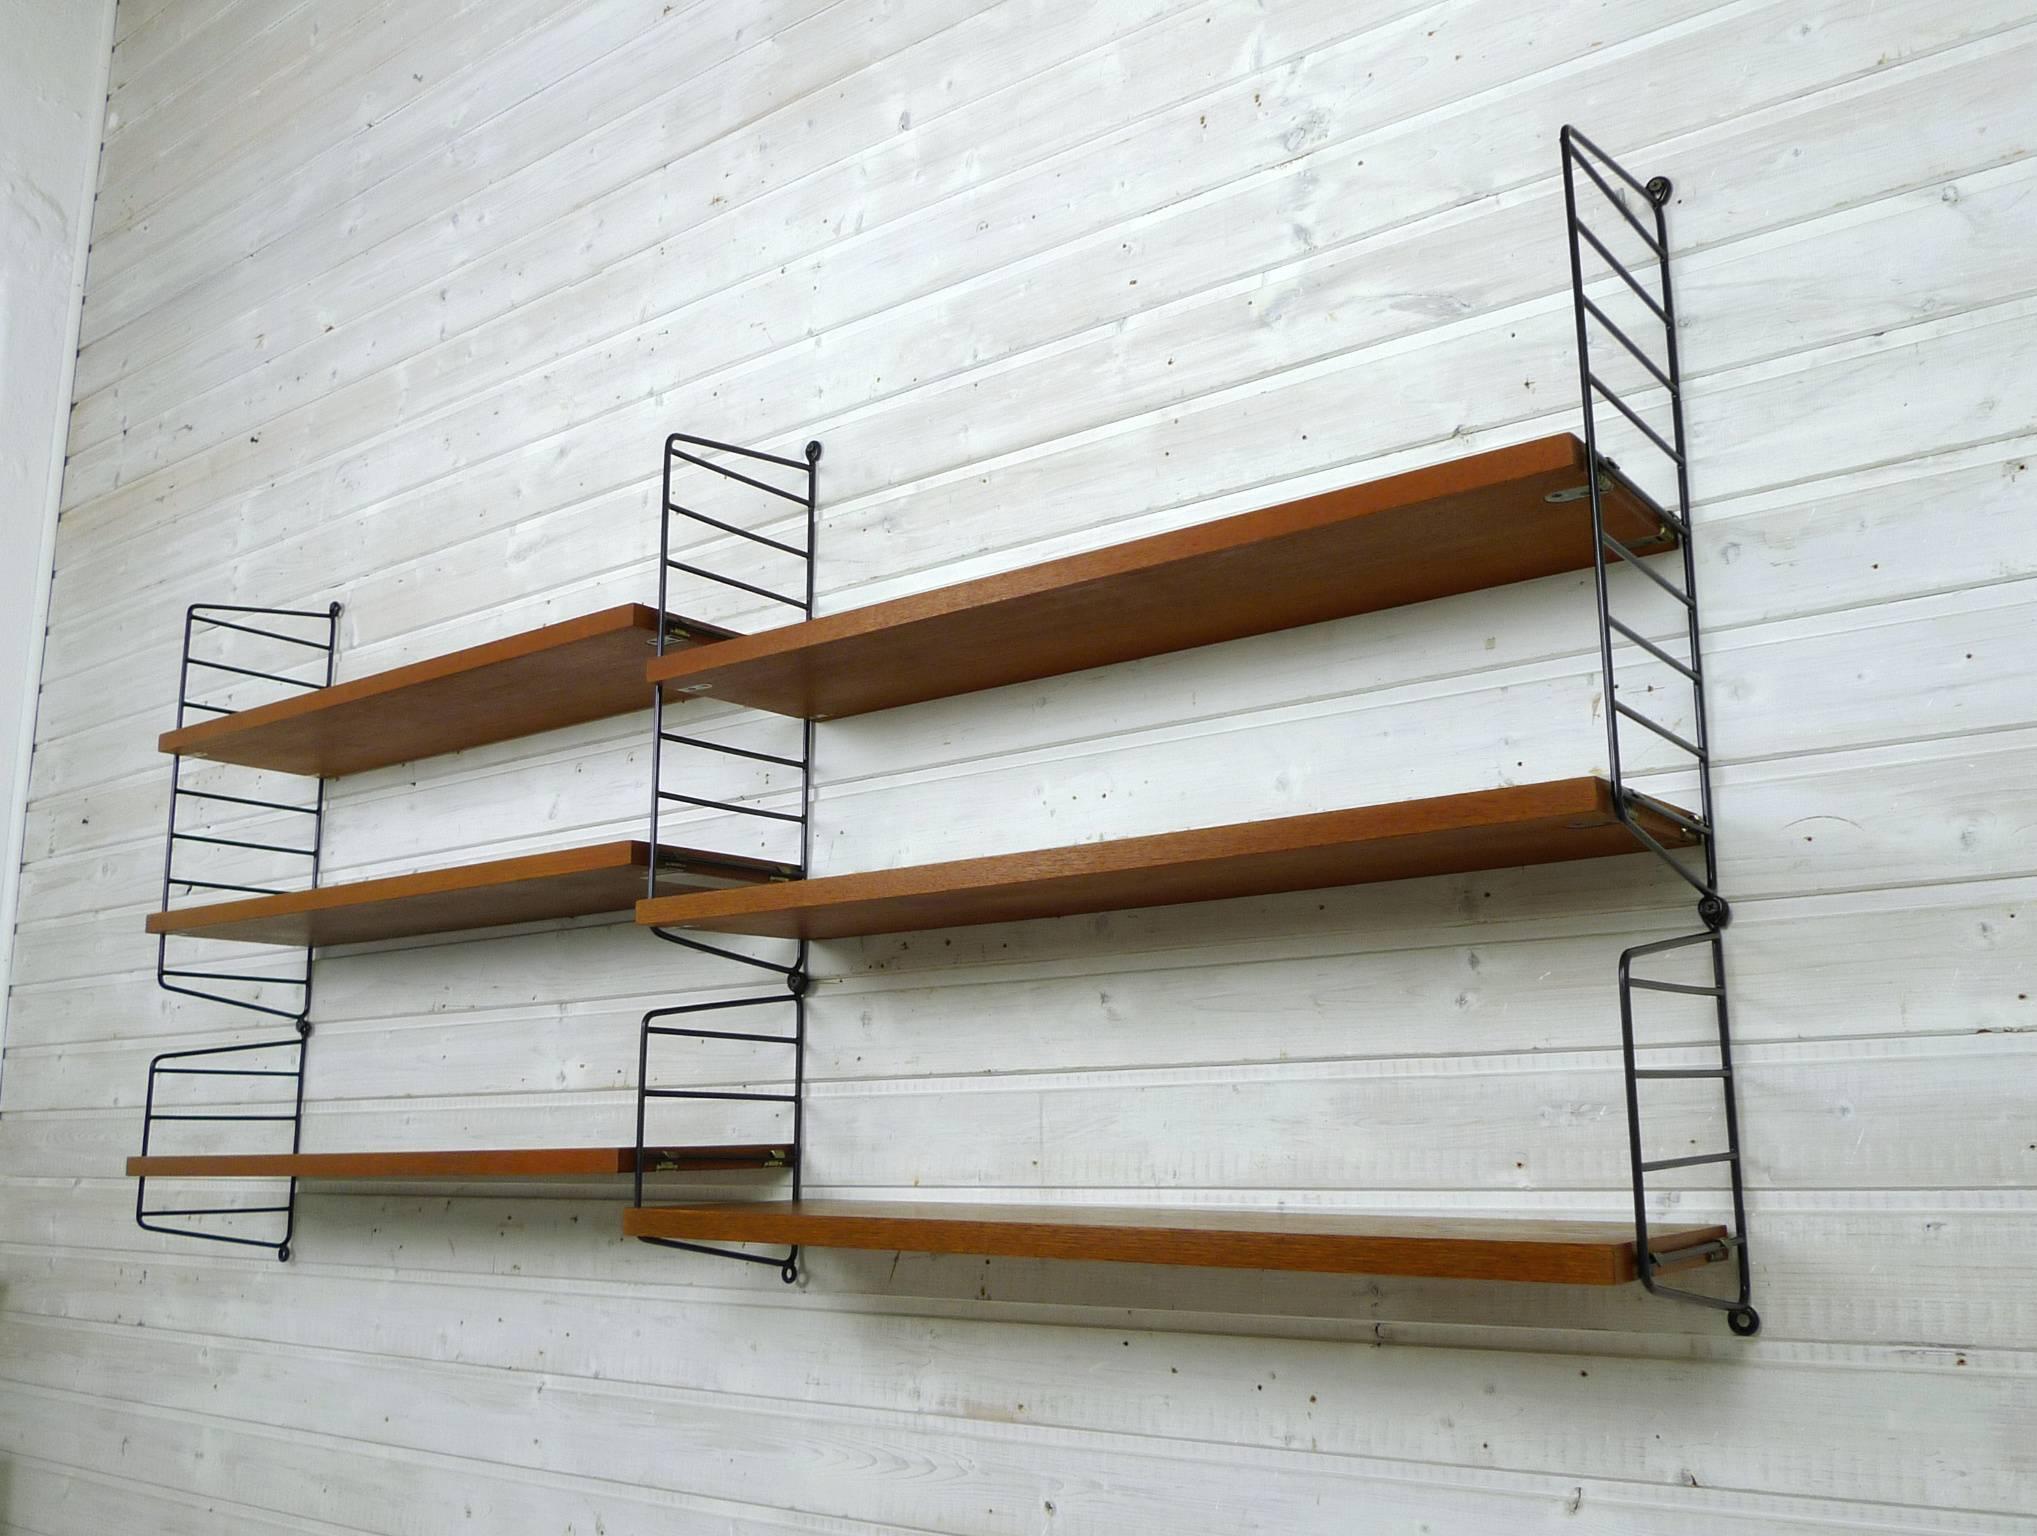 20th Century Swedish Wall Unit with Six Teak Shelves by Nisse Strinning for String, 1950s